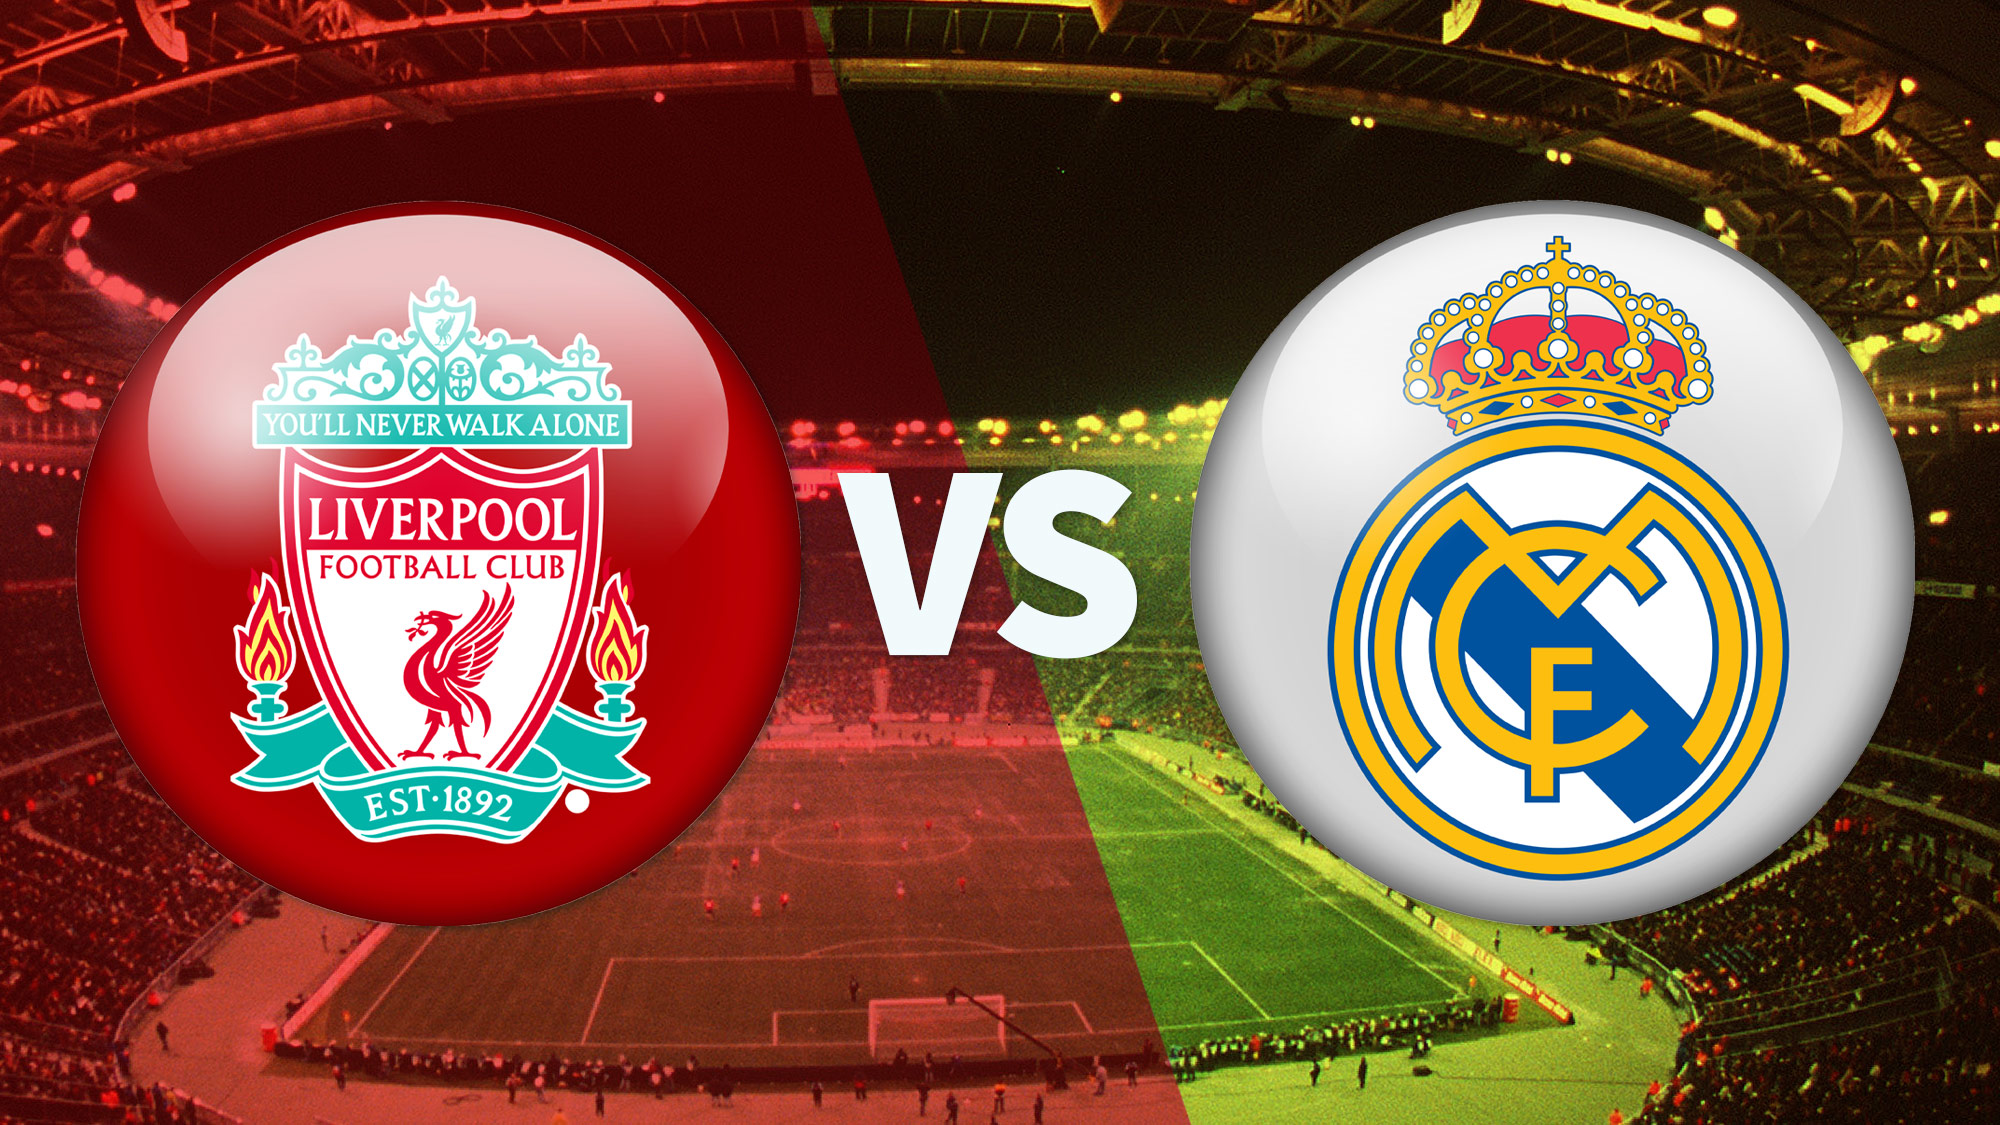 The Liverpool and Real Madrid badges against a backdrop of the Stade de France stadium in Paris